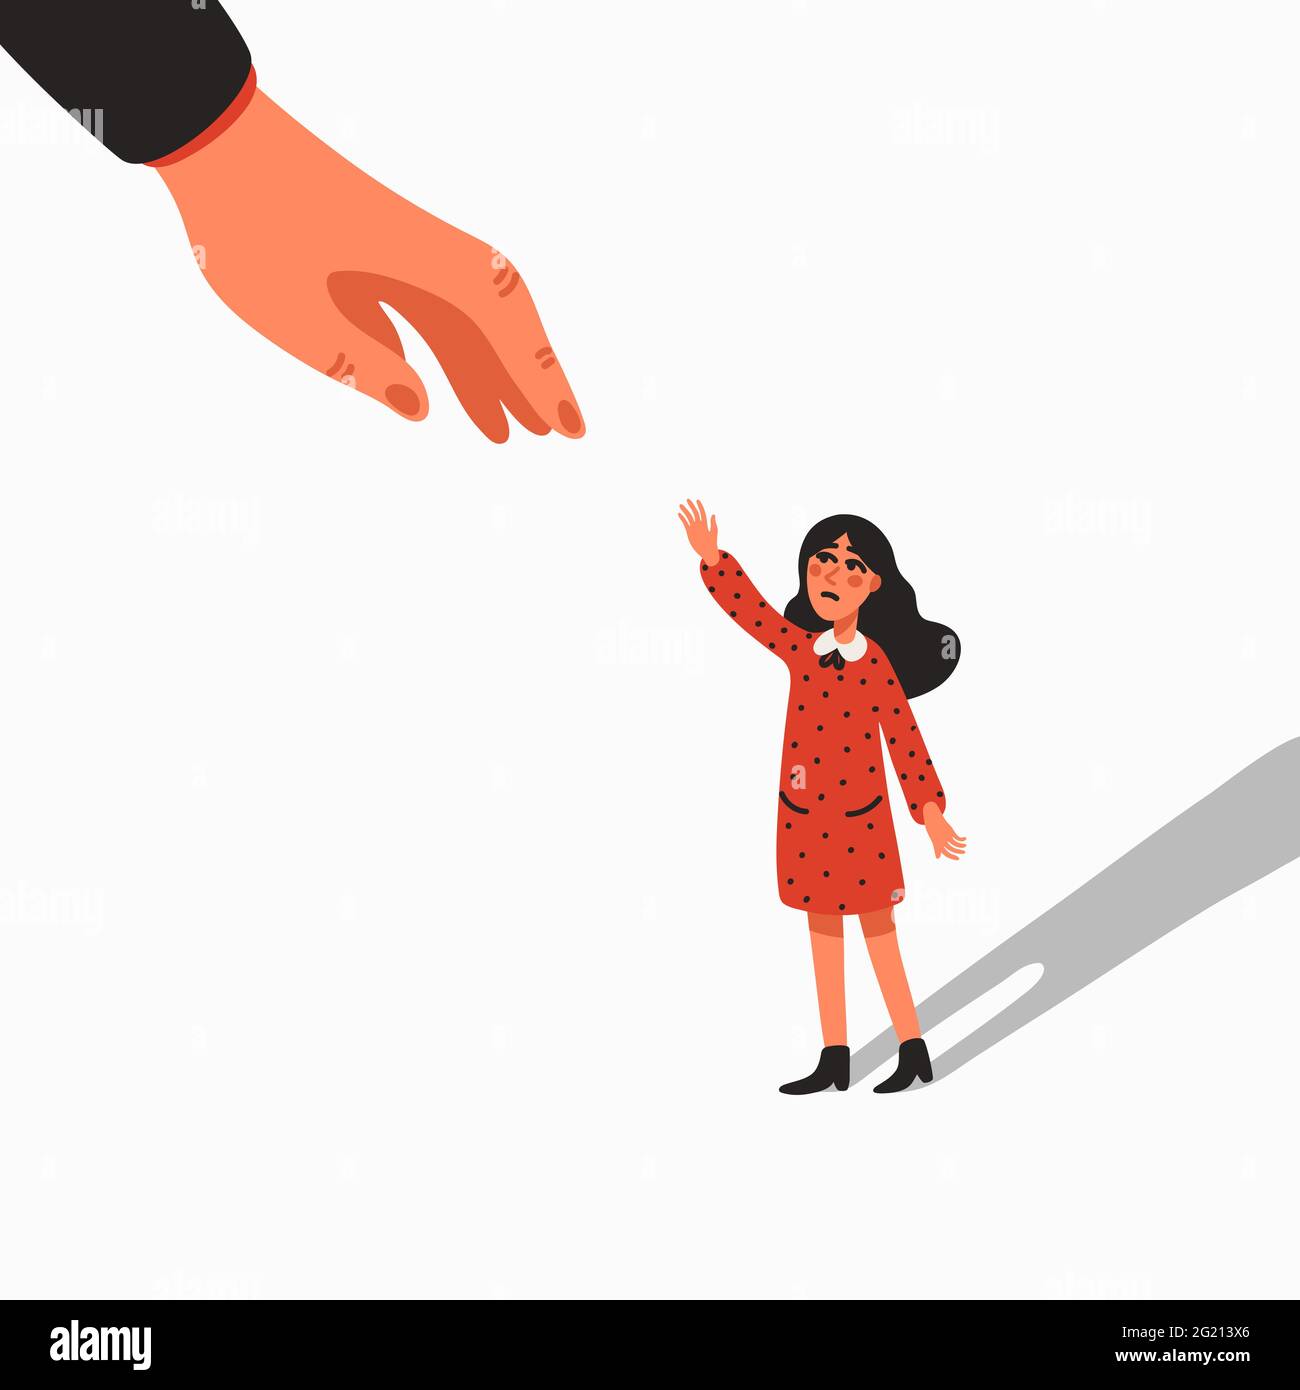 Helping hand. Empathy, help, and support - helping hand reaching out to woman. Psychological care. Vector illustration in flat cartoon style on white b Stock Vector